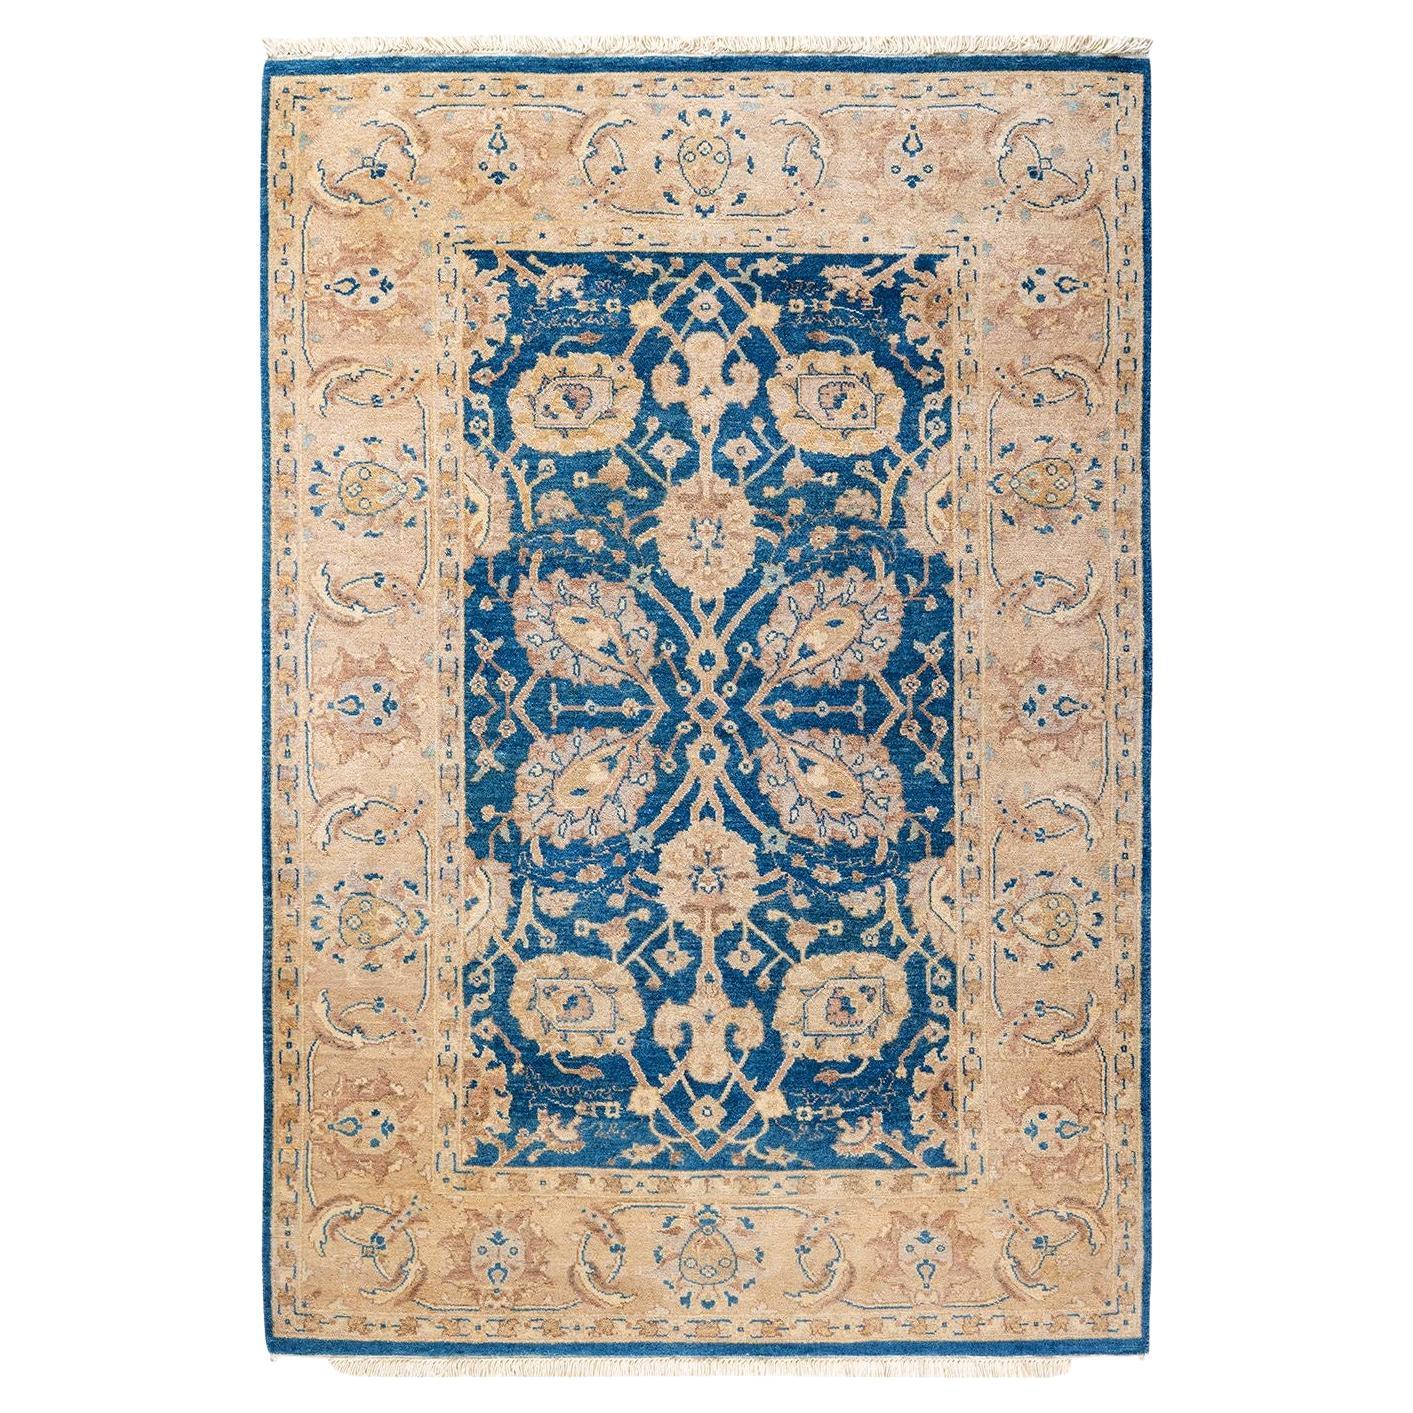 One of a Kind Hand Knotted Contemporary Floral Eclectic Blue Area Rug 